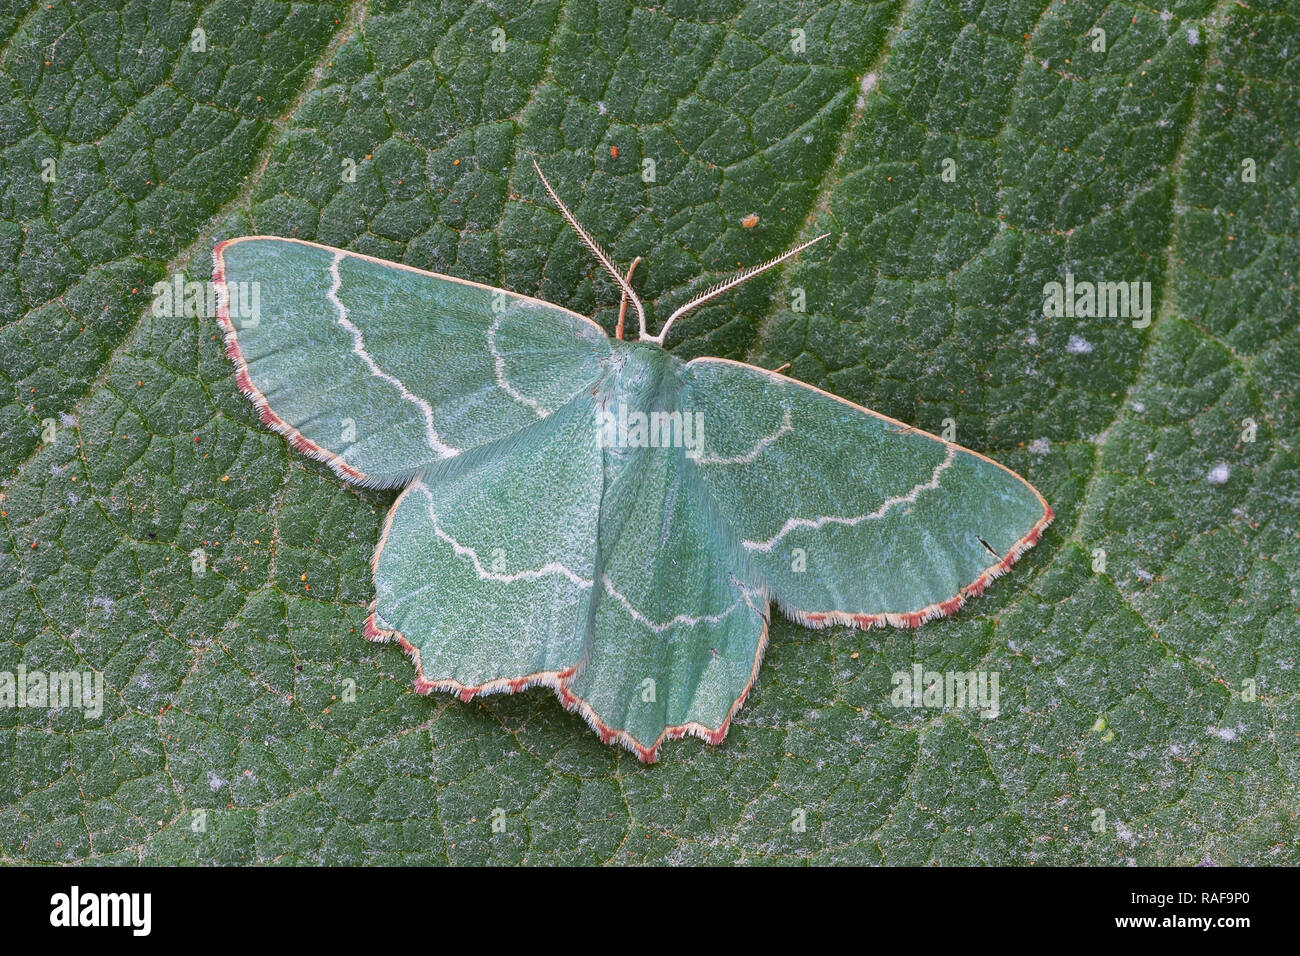 Thalera fimbrialis perched on a green leaf Stock Photo